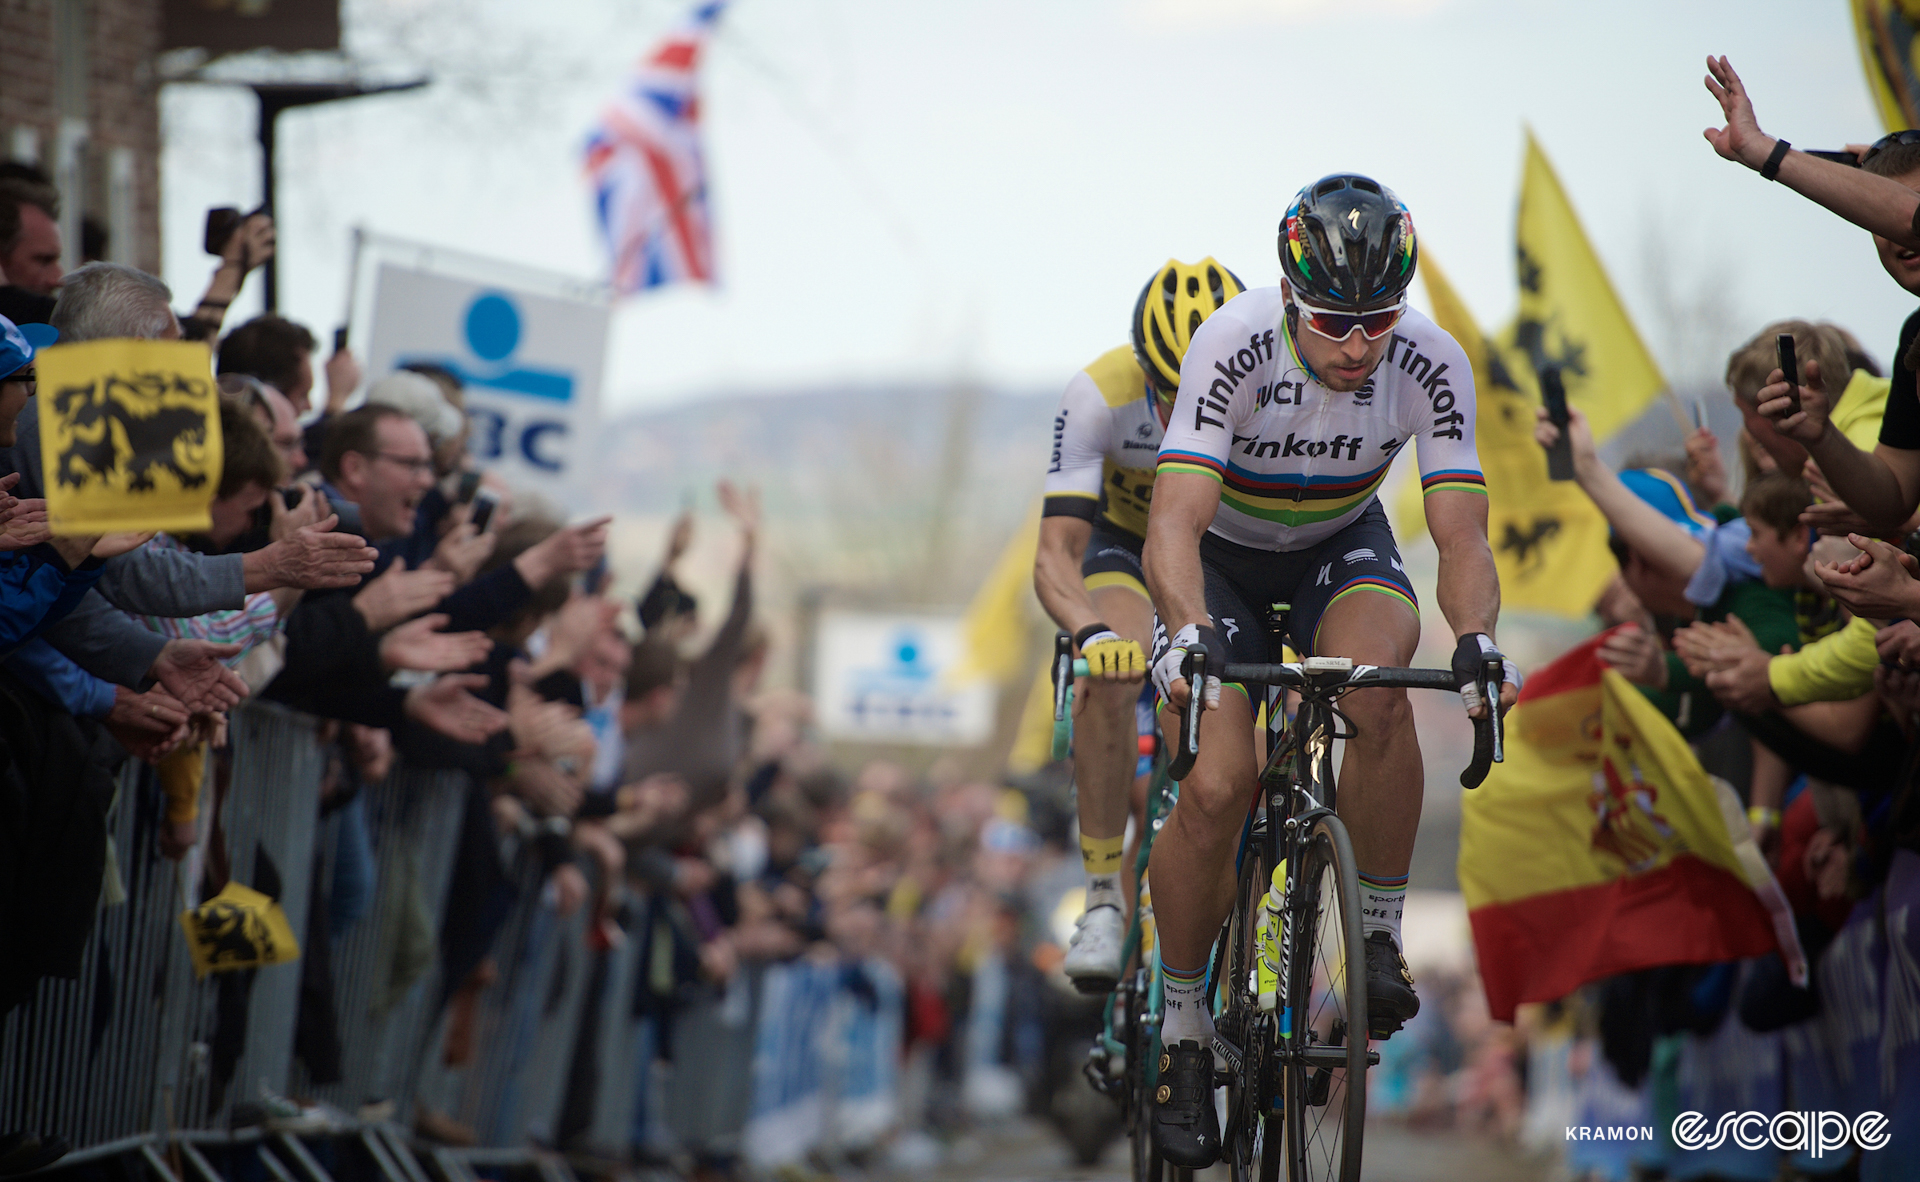 Peter Sagan leads Sep Vanmarcke up the Oude Kwaremont climb at the 2015 Tour of Flanders.